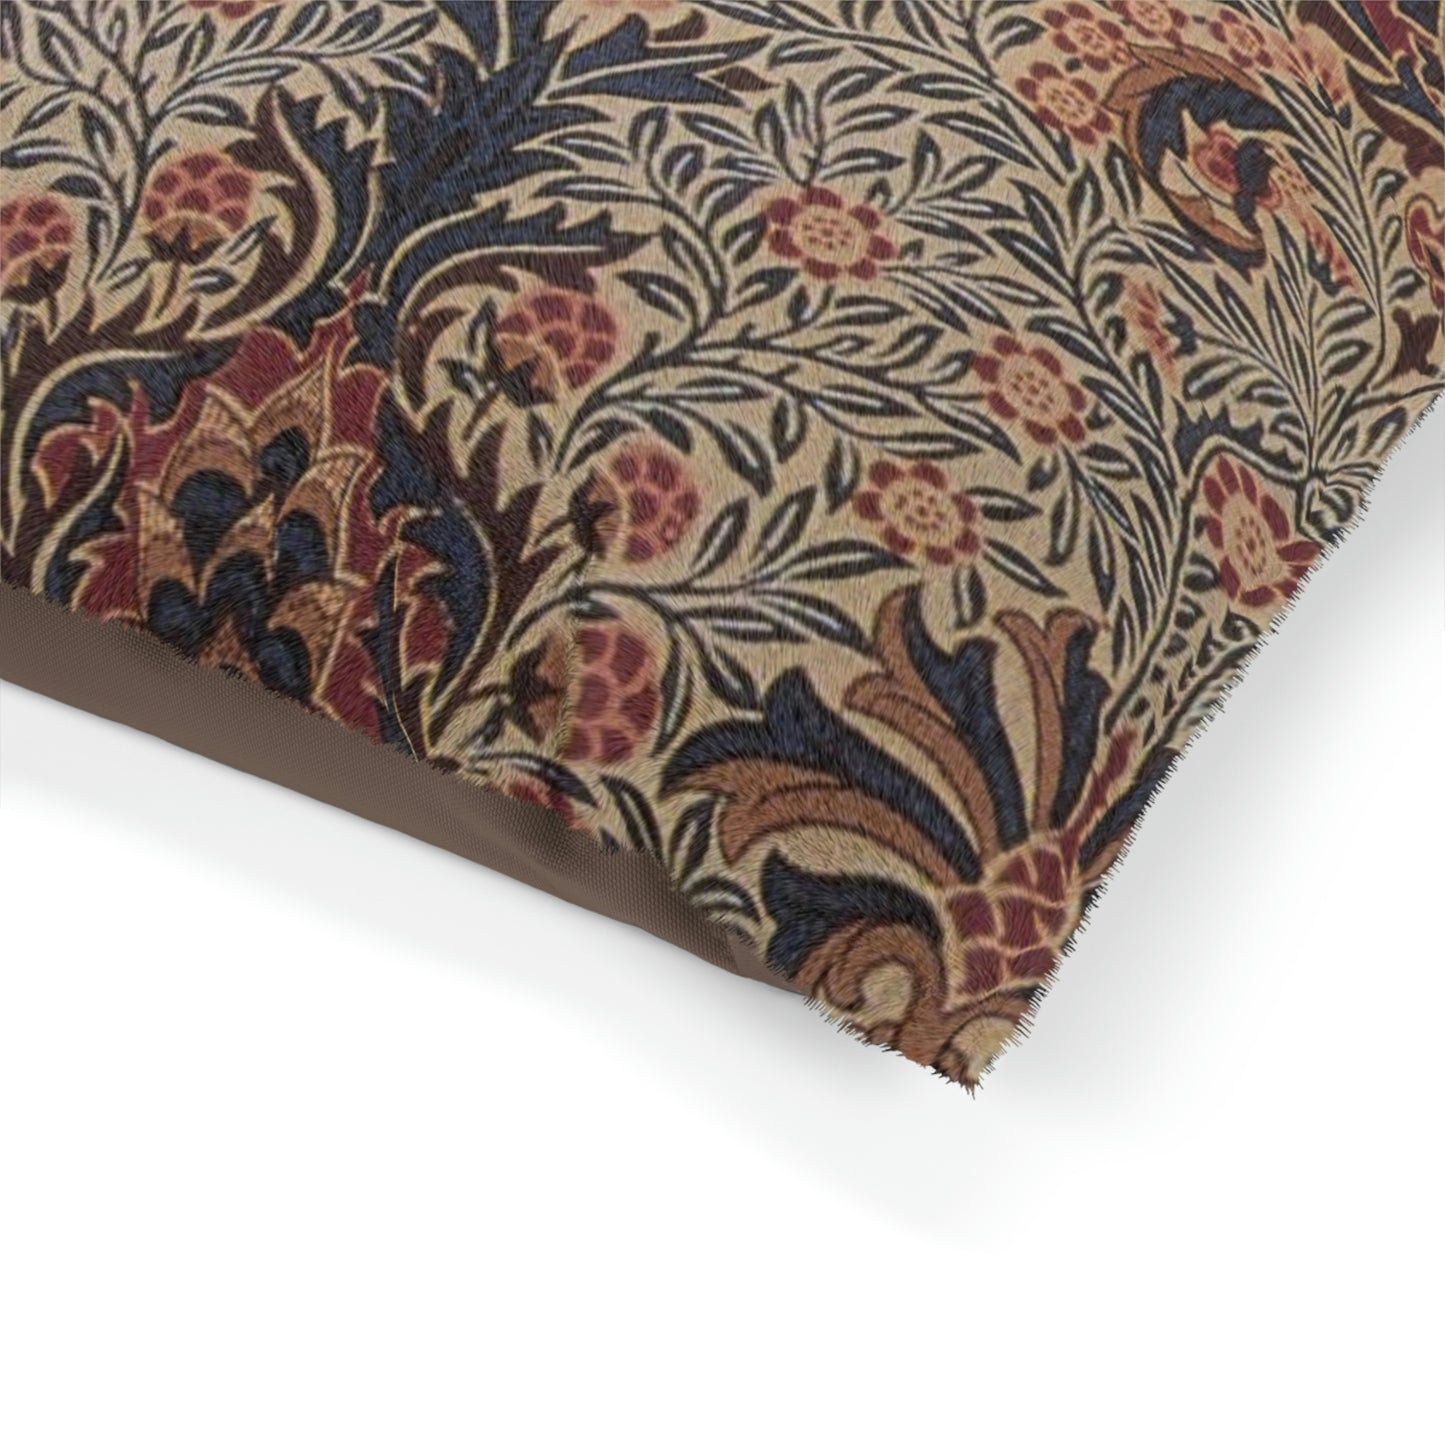 William Morris & Co Pet Bed - Pomegranate Collection